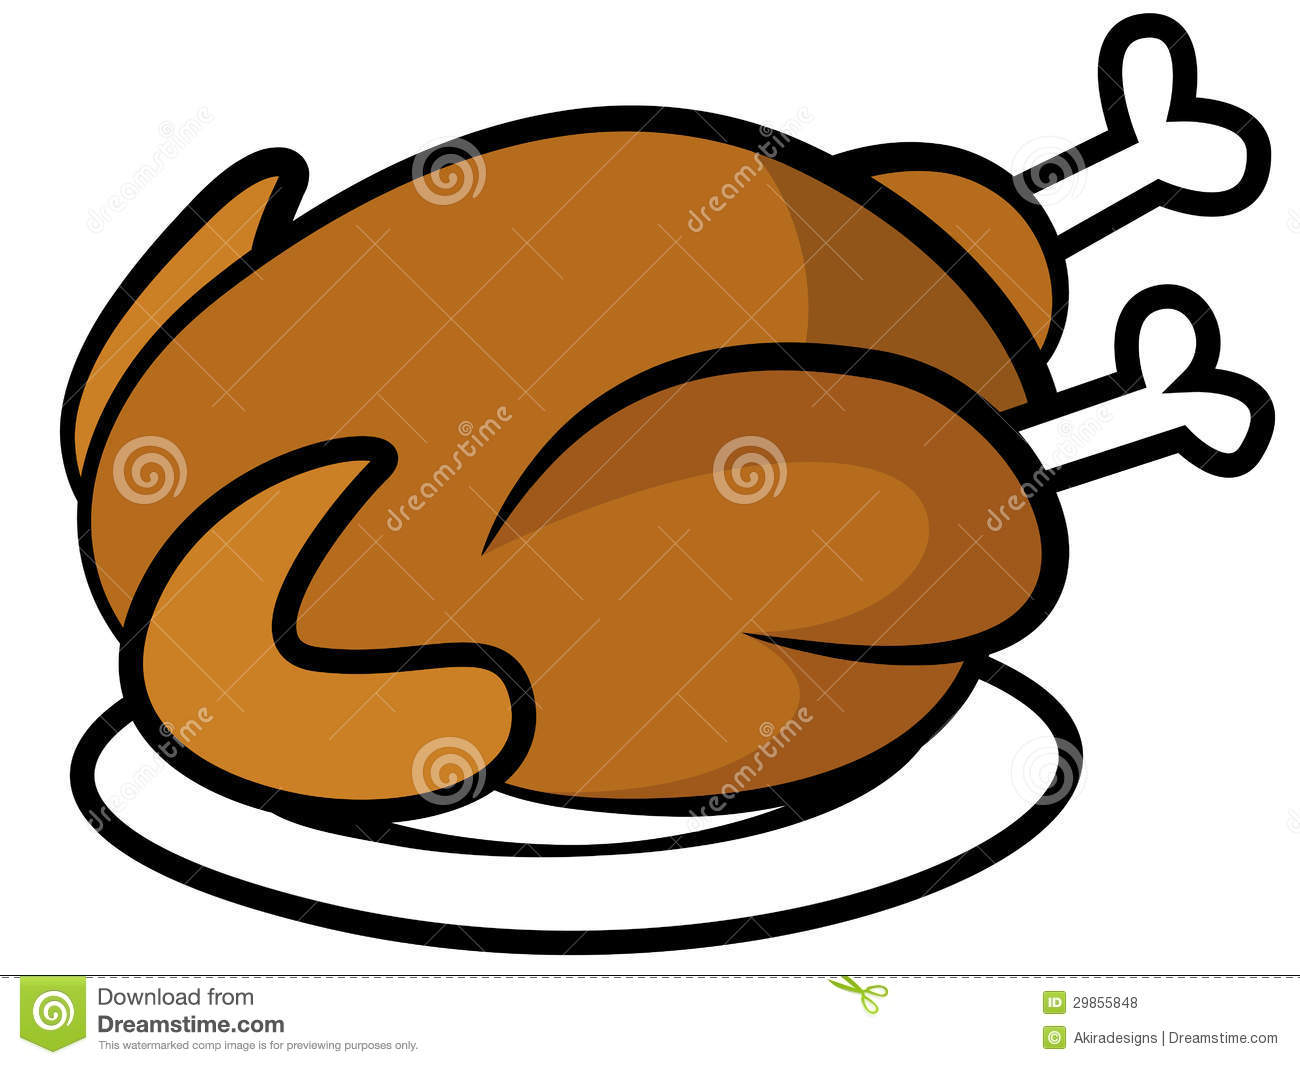 Chicken Dinner Clipart   Clipart Panda   Free Clipart Images